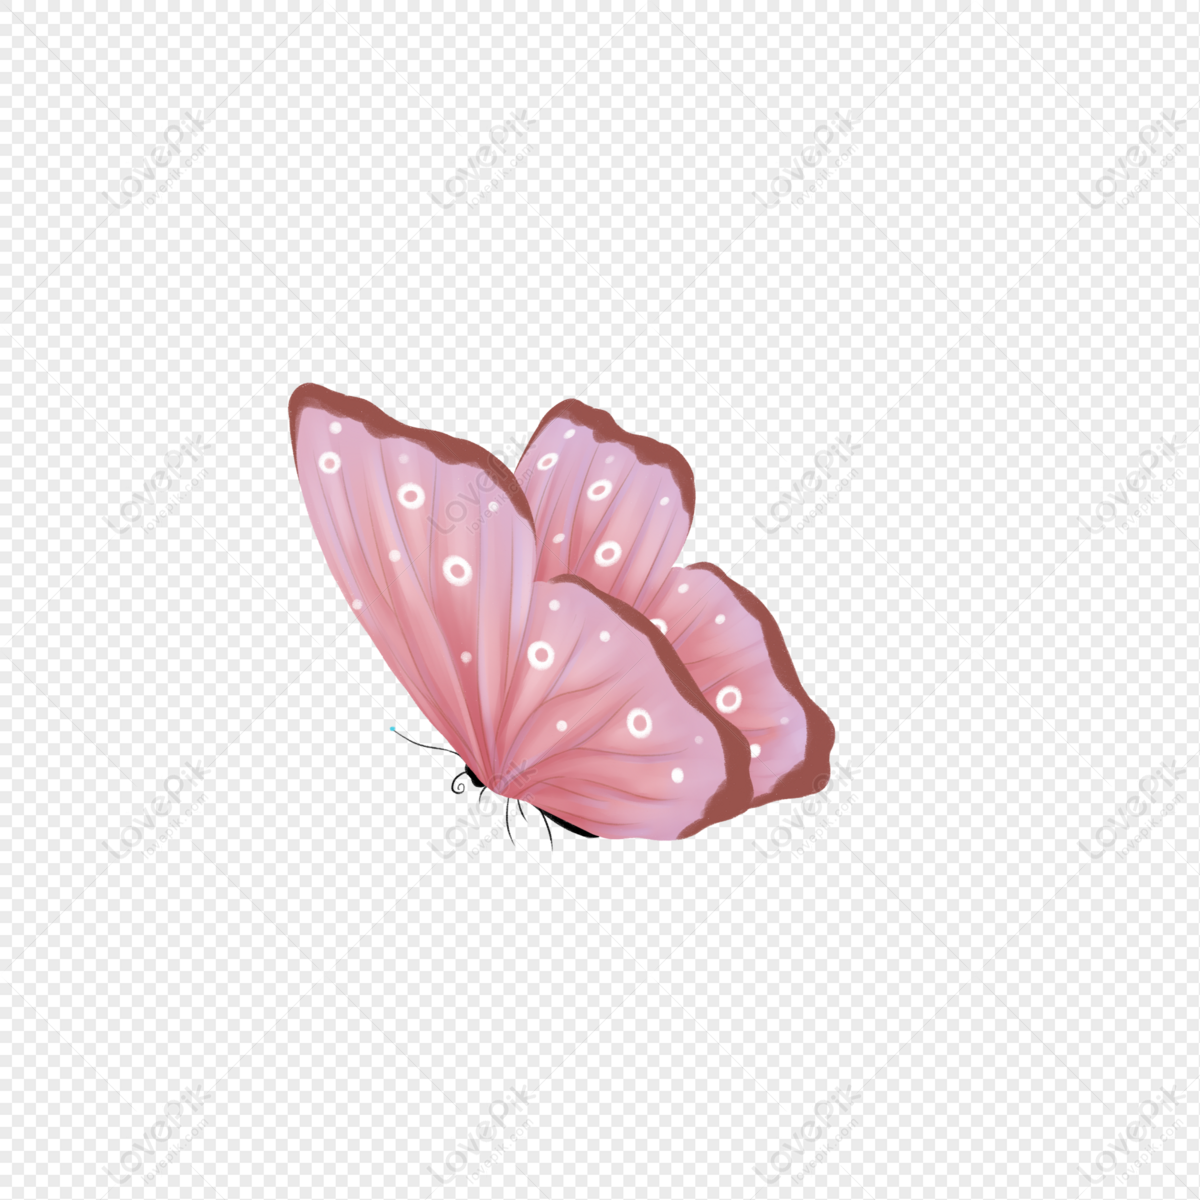 Flying Pink Butterfly PNG Transparent Image And Clipart Image For Free  Download - Lovepik | 401686727